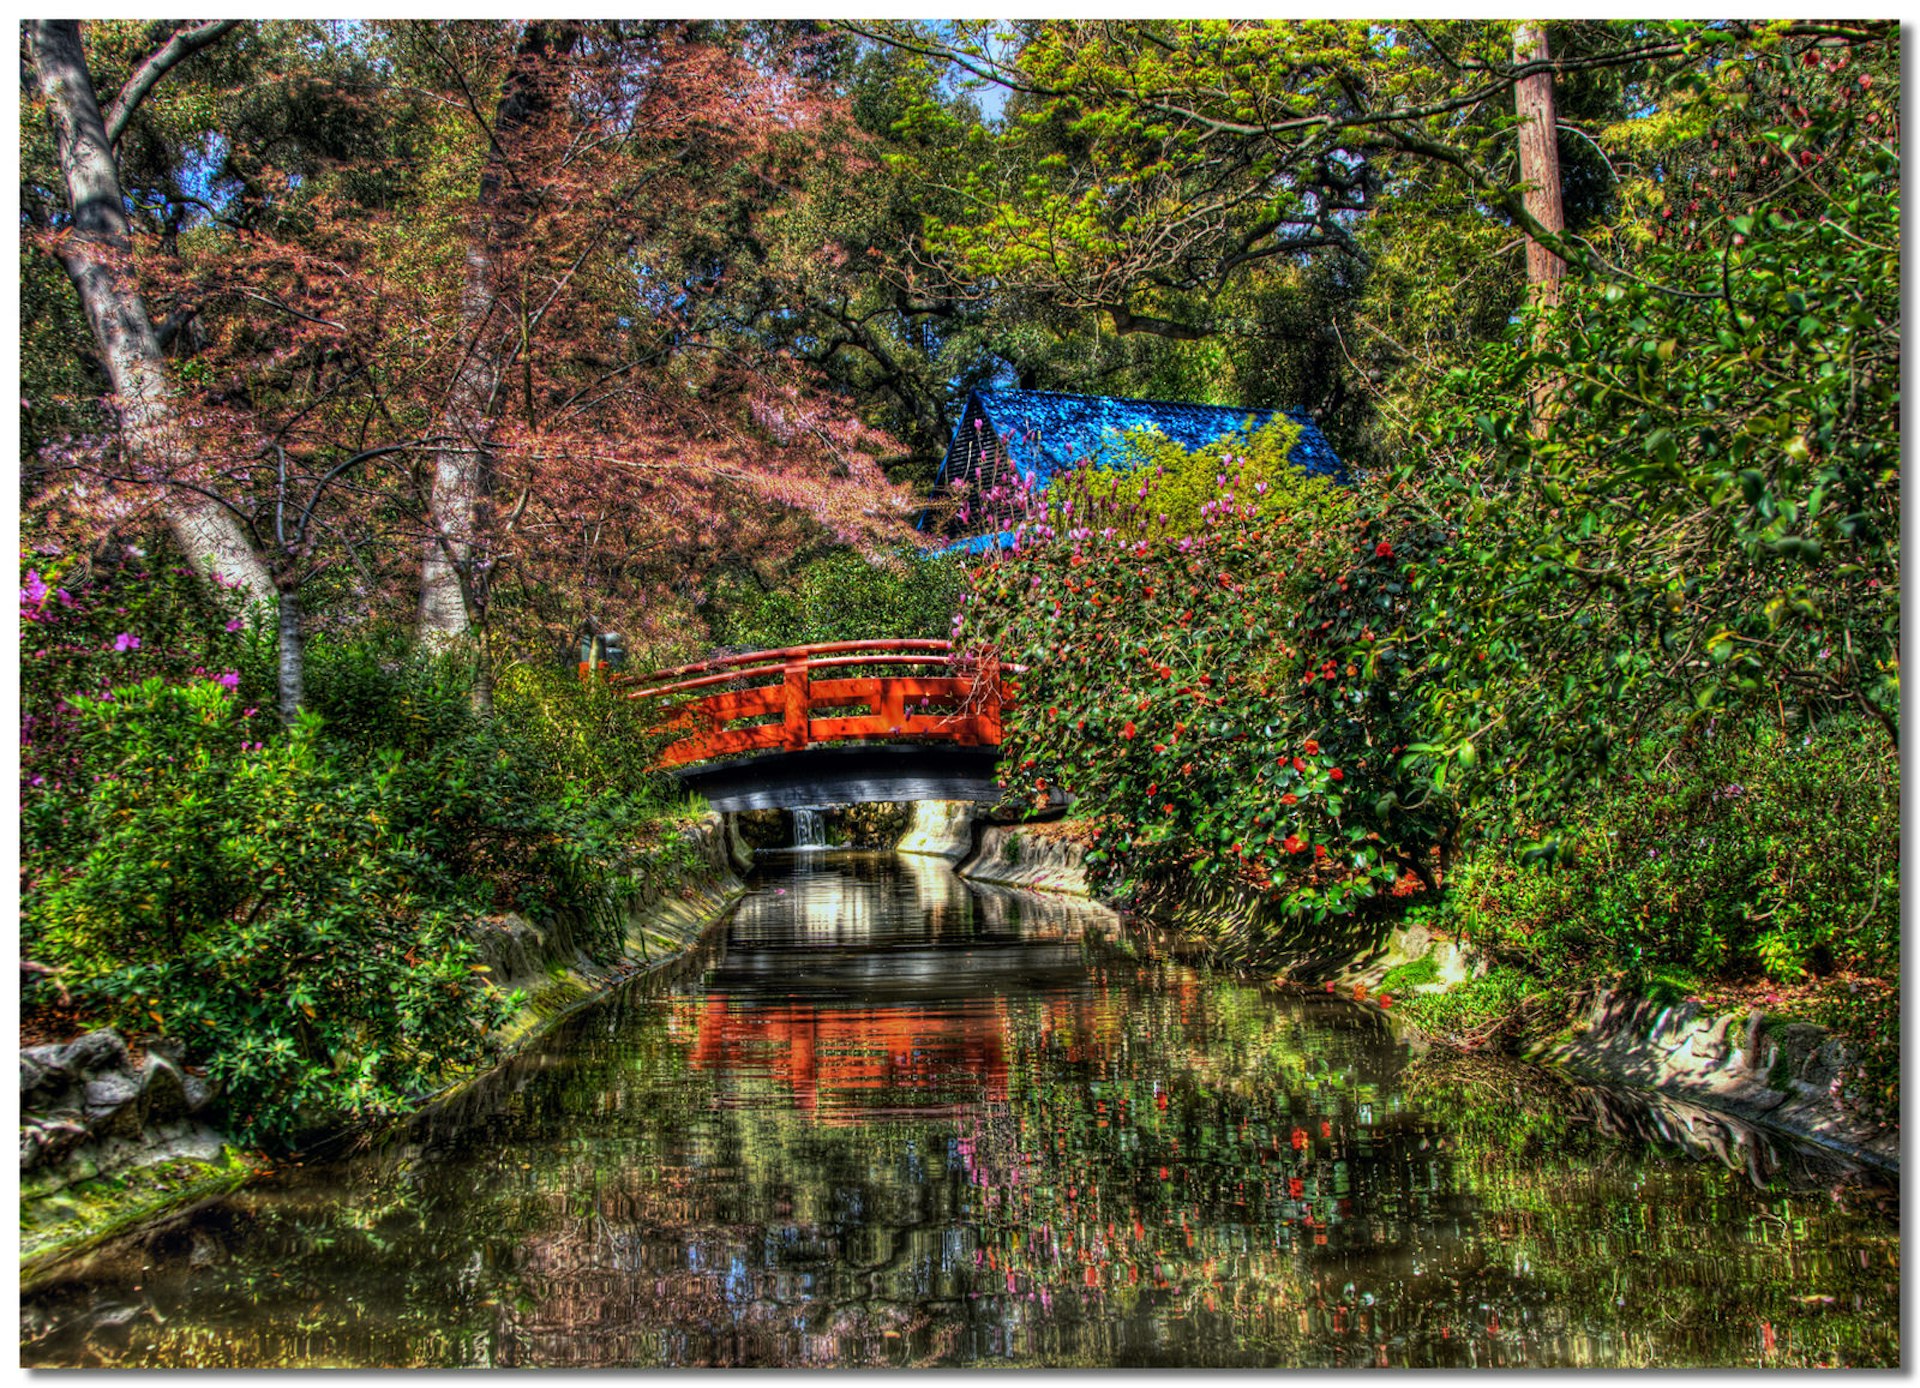 A red japanese-style bridge is reflected in a stream and surrounded by colorful flowers and shrubs.